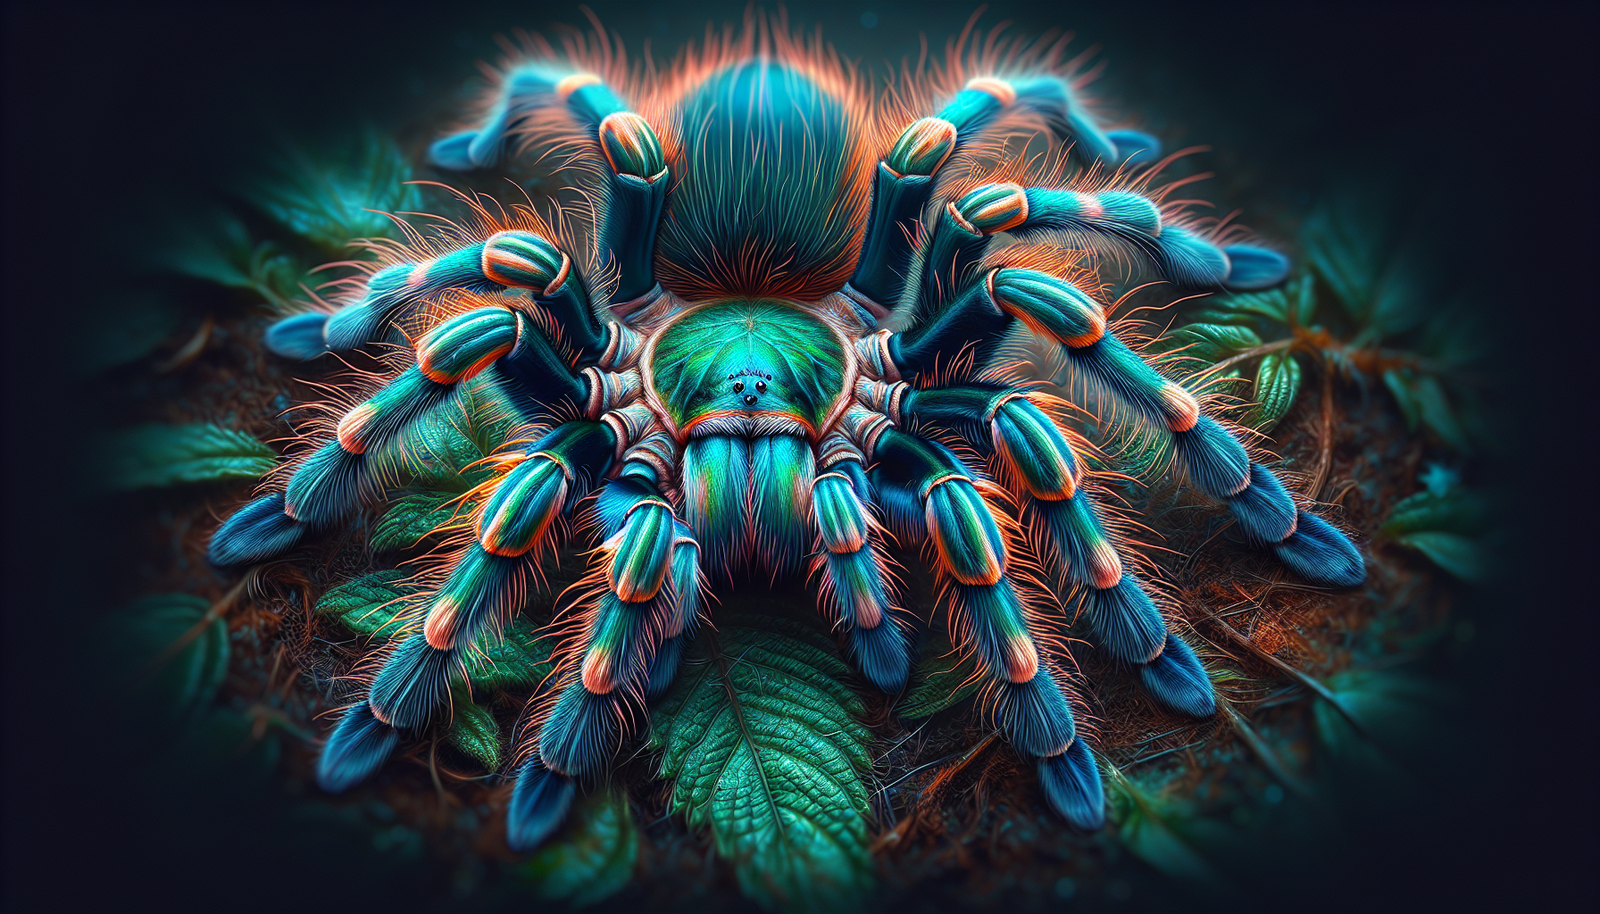 Can You Provide Insights Into The Care Of The Visually Striking Green Bottle Blue Tarantula?